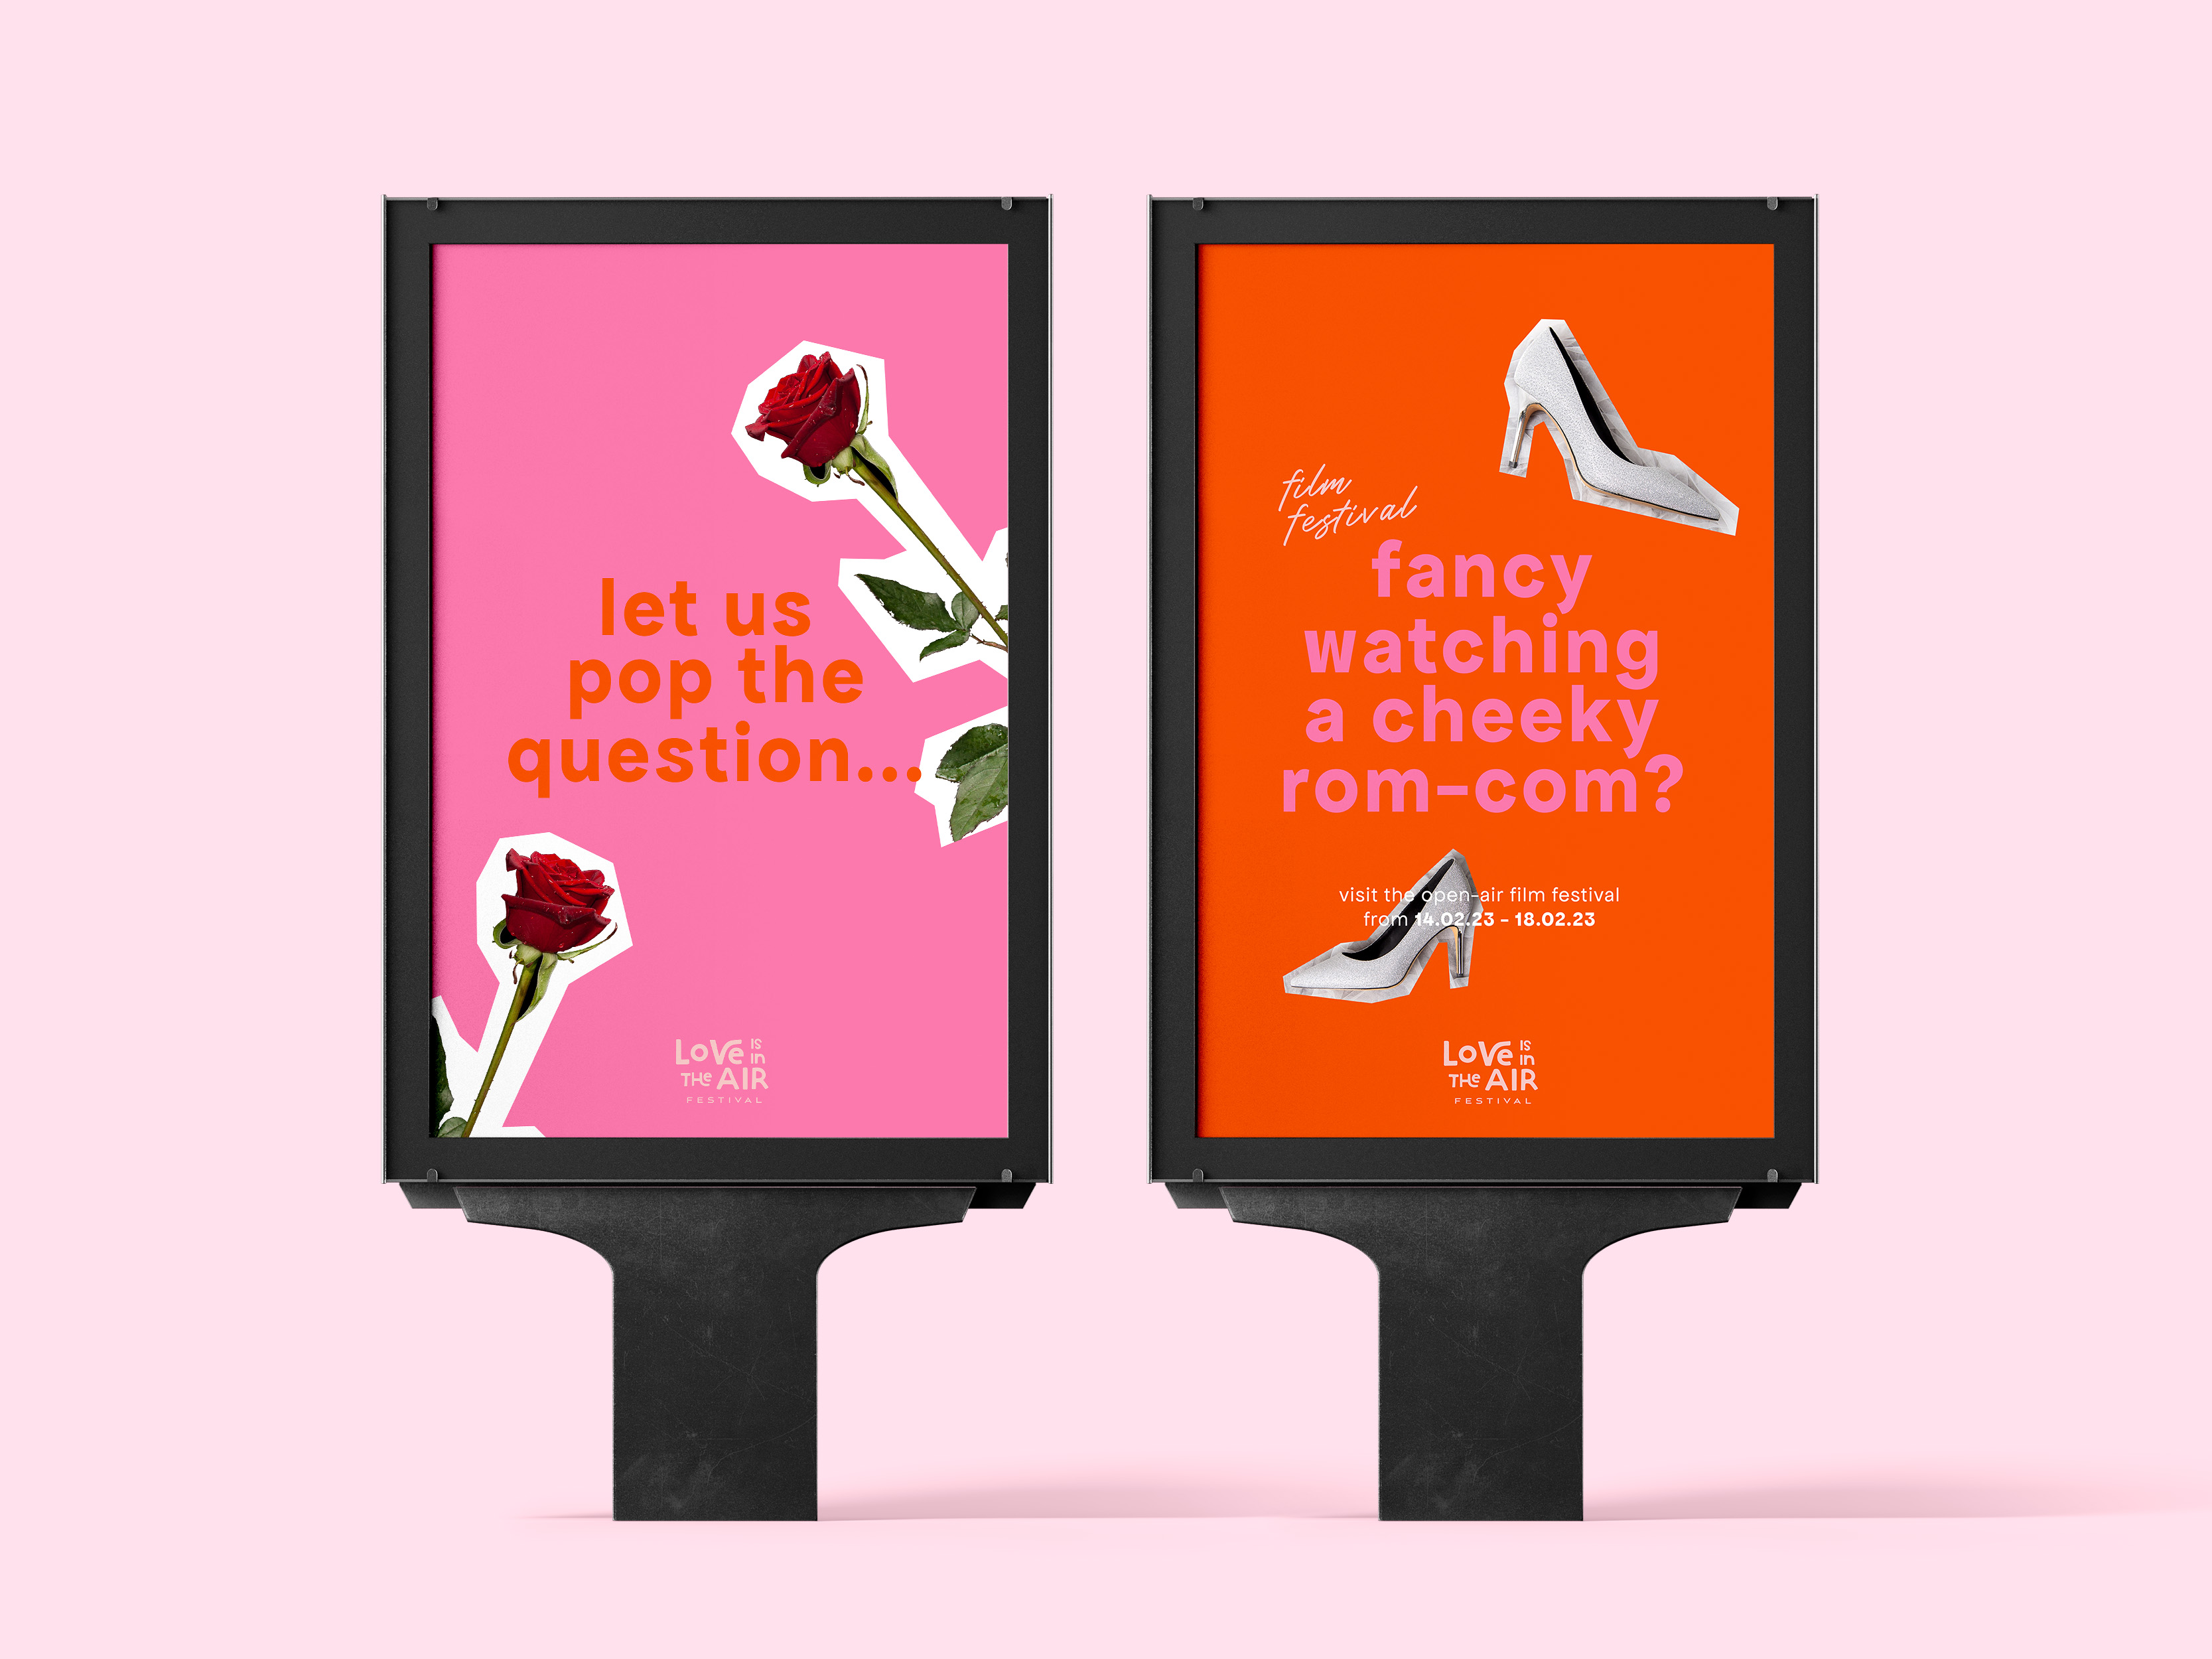 BA Graphic Communication work by Jasmine Parkin showing two posters with pink and orange backgrounds and featuring playful copywriting and collage cut-out visuals.